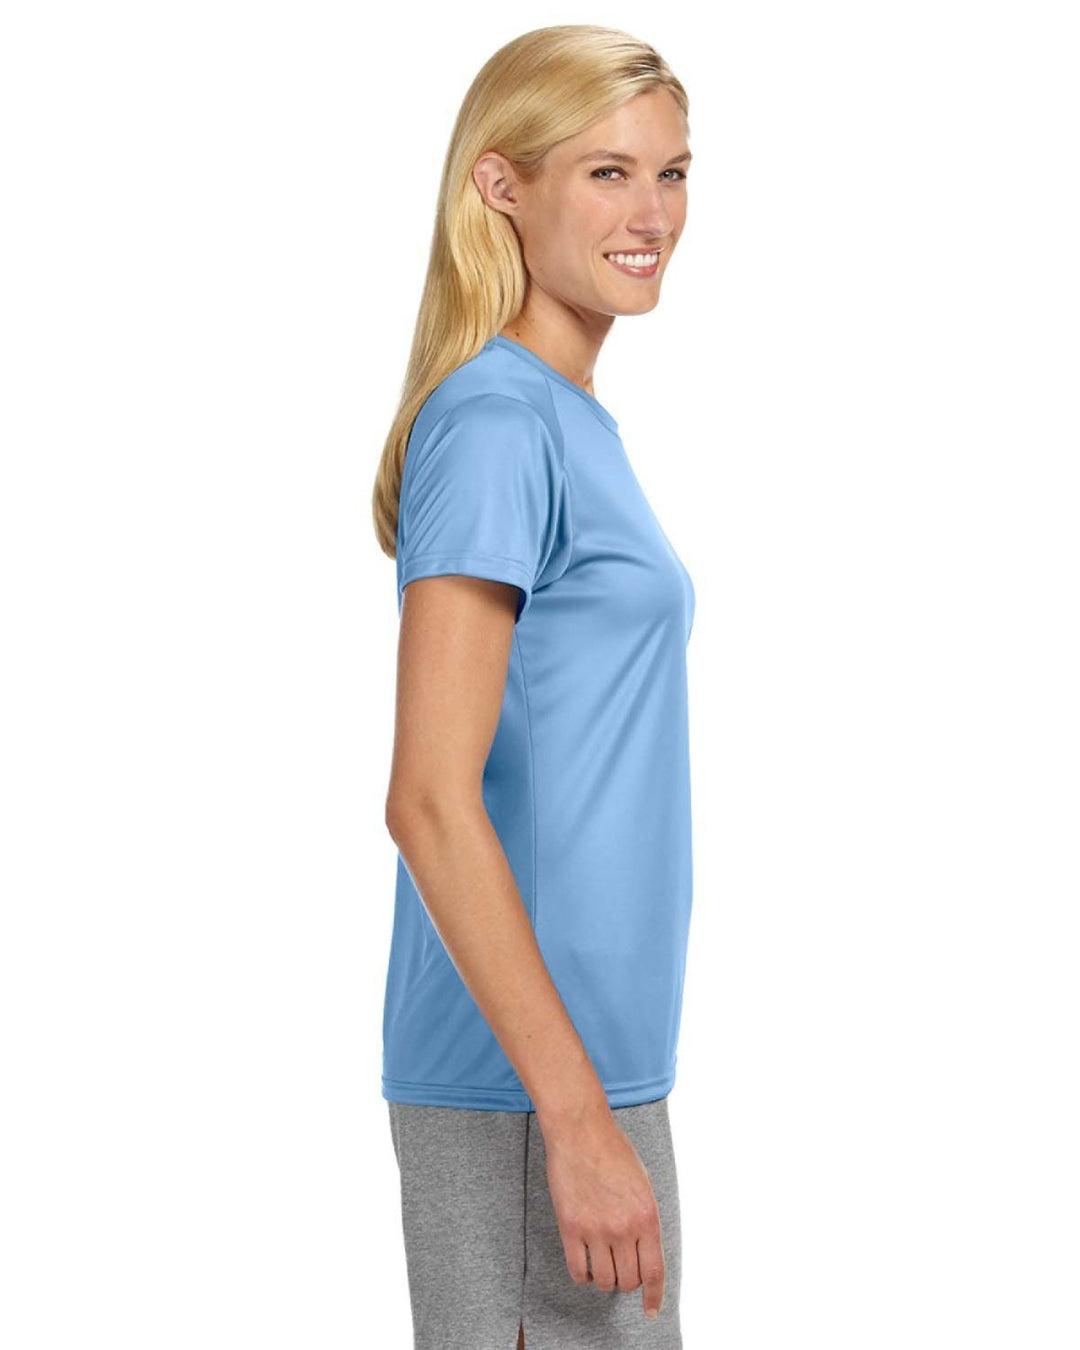 A4 NW3201 Ladies' Cooling Performance T-Shirt - Shop Now